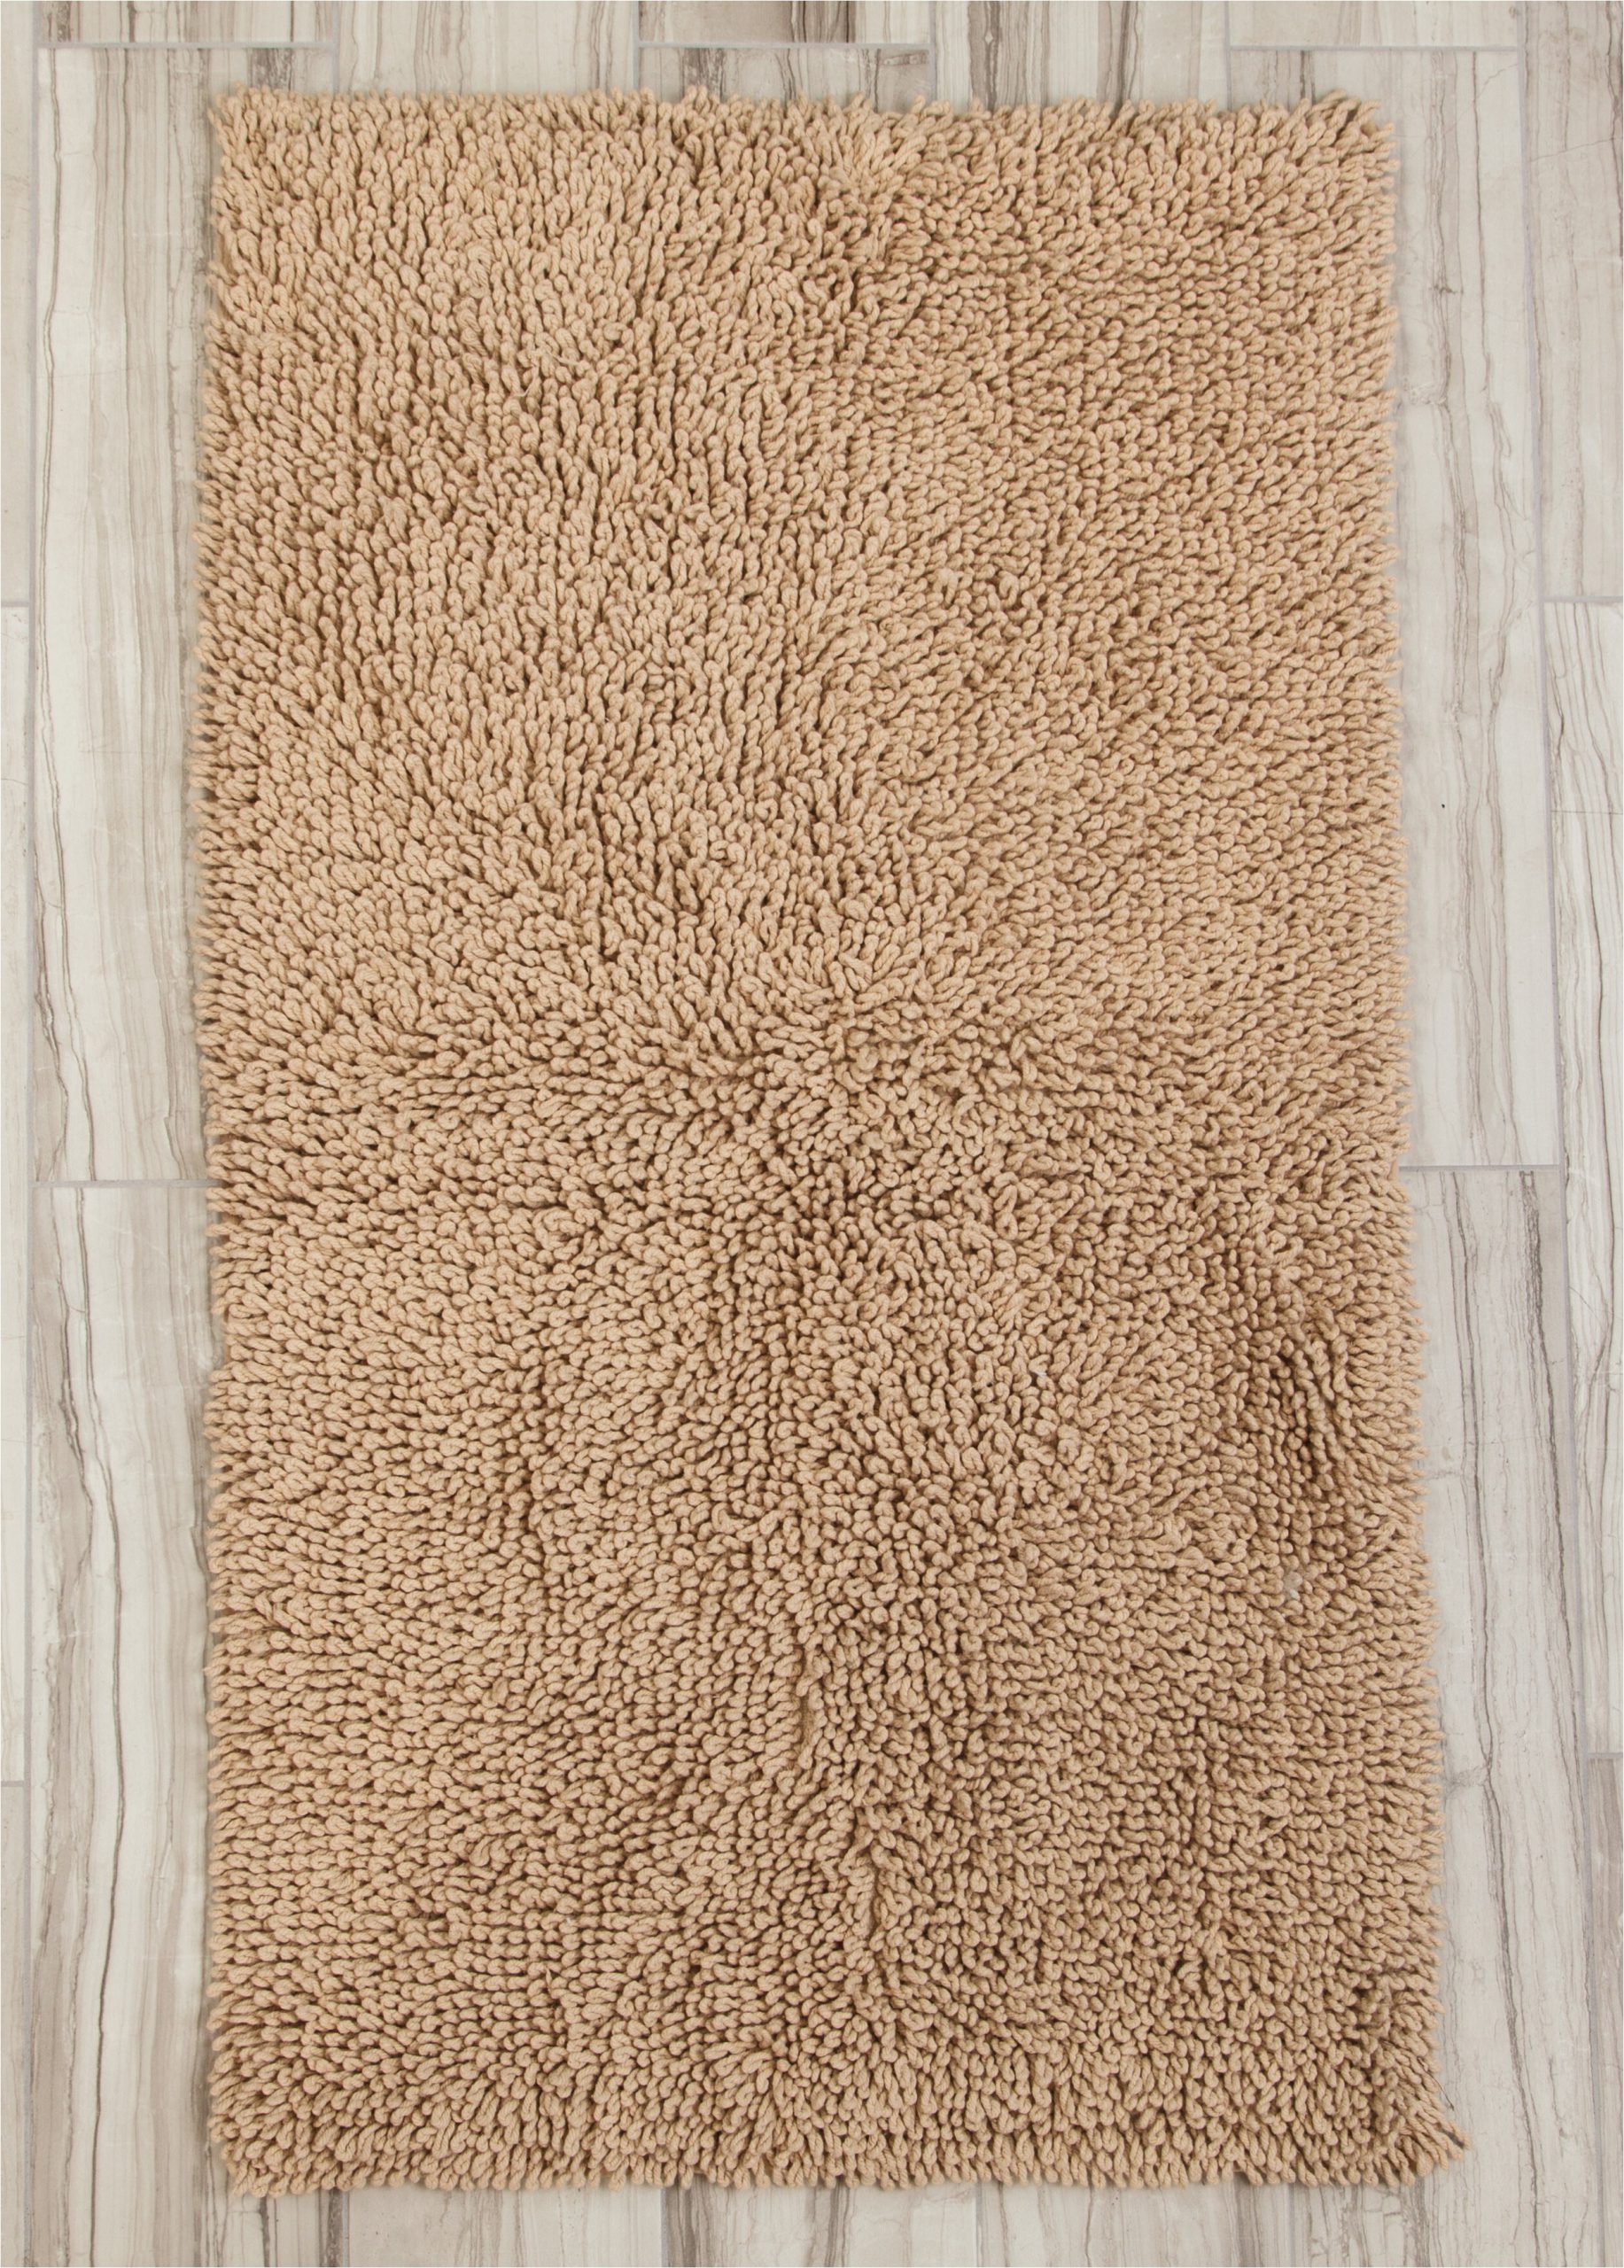 Cotton Bath Rugs with Latex Backing Eastcotts Spray Latex Back Rectangle Cotton Non Slip Bath Rug